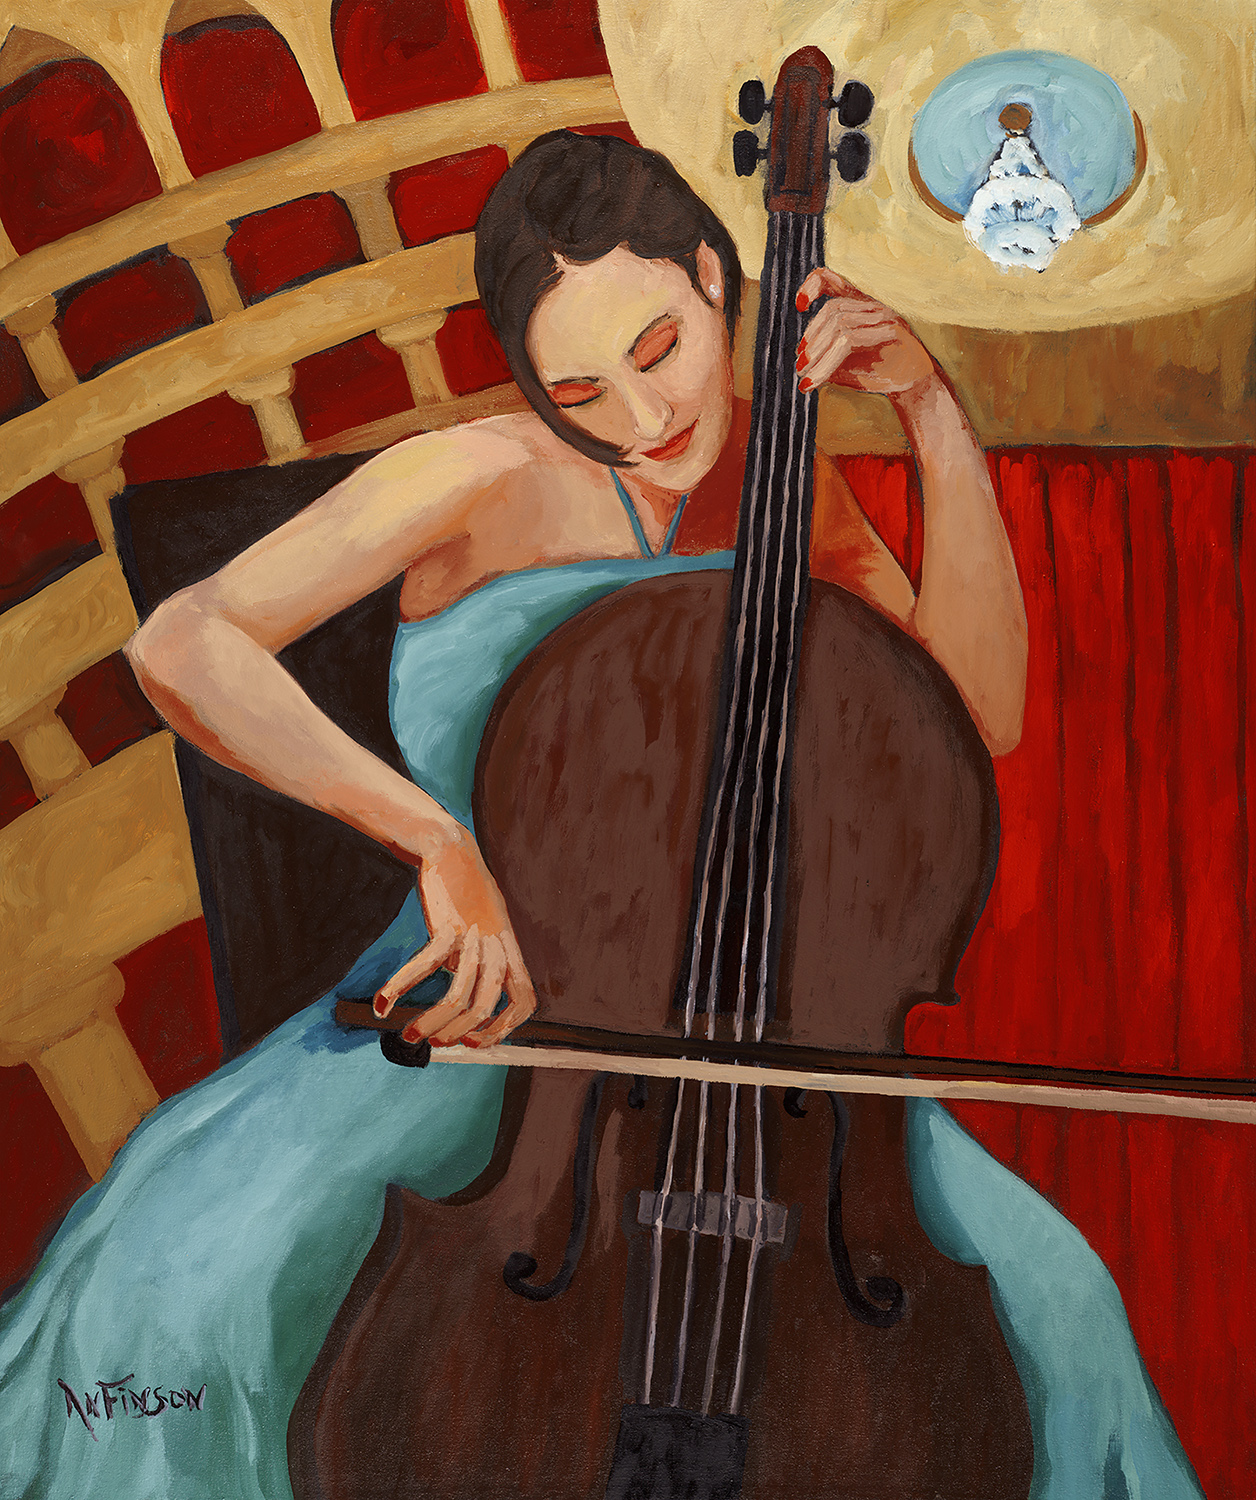  cellist  private collection  48 x 36 2014 